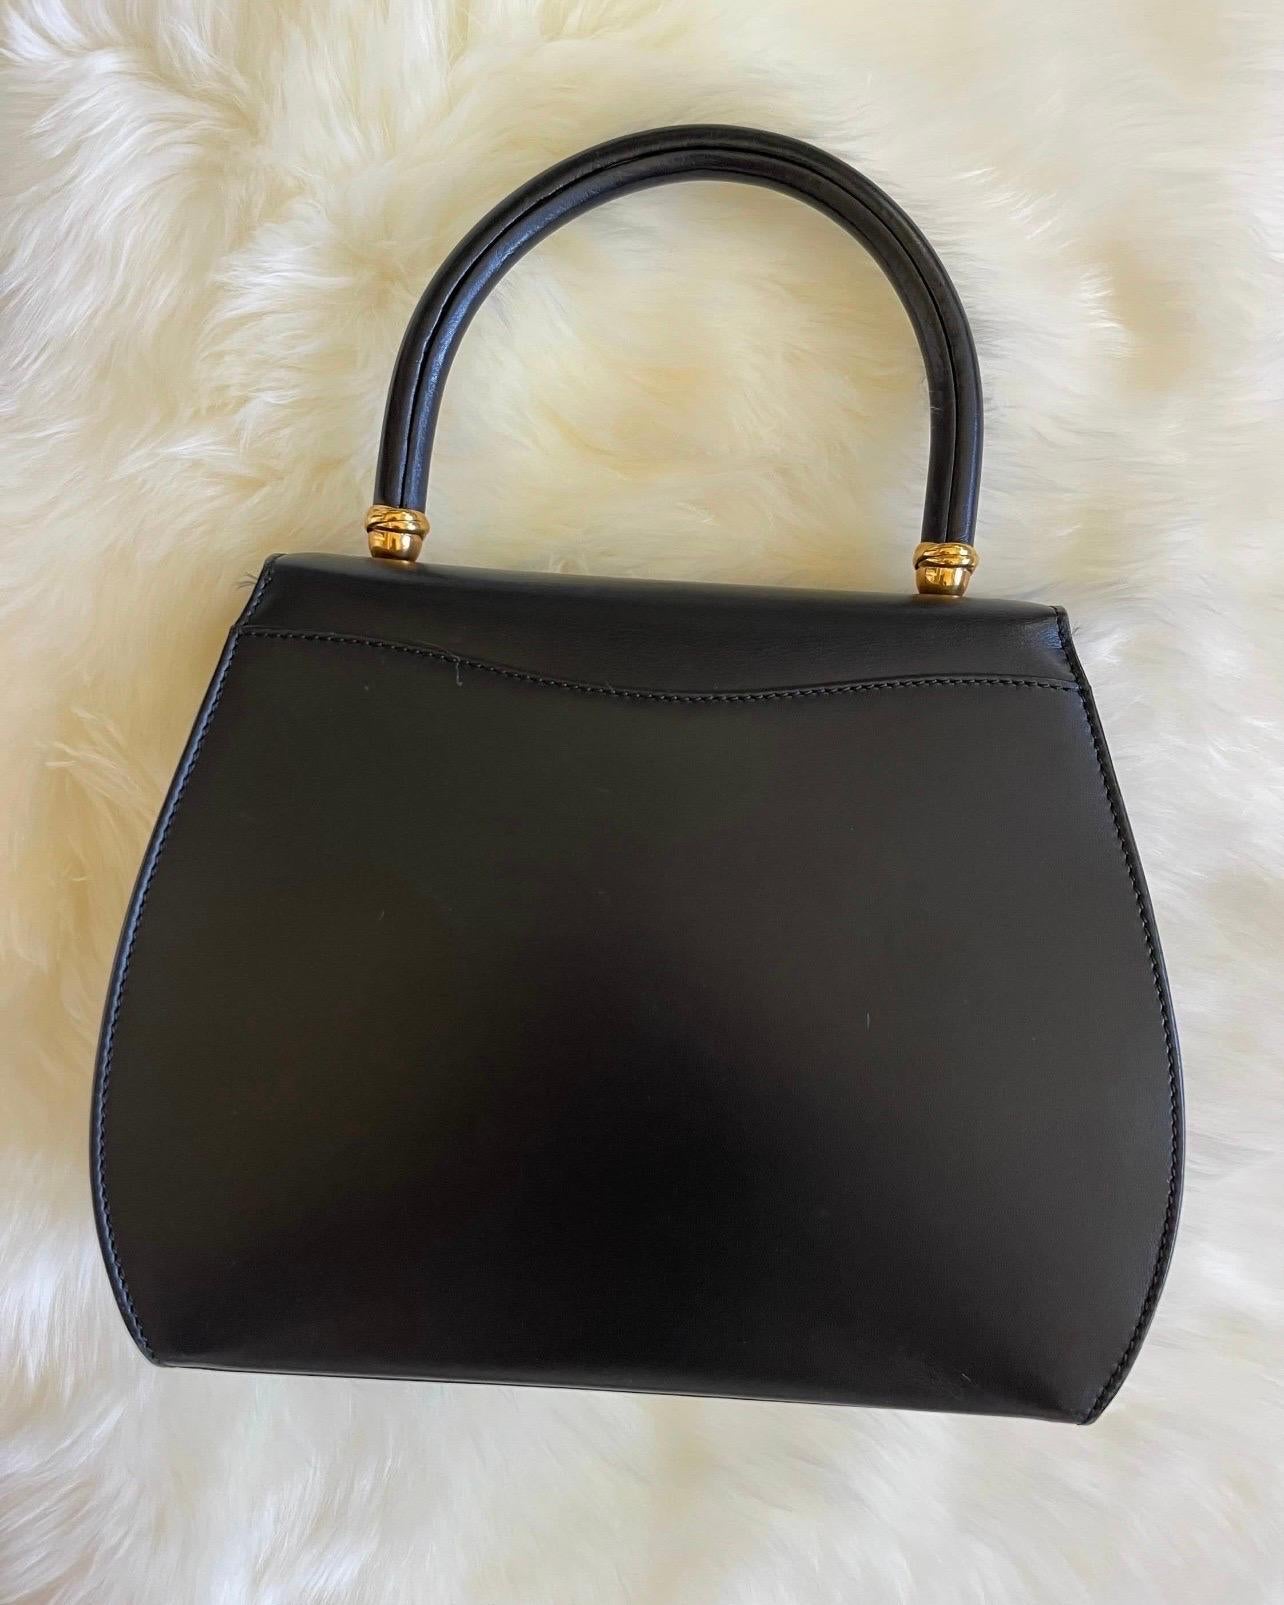 This stunning bag is such a rare and vintage treasure! 

*Includes dust bag and coin pouch

The signature Cartier panther plaque features a singular rounded top handle, fold over top with closure snap, a main compartment, a small front compartment,